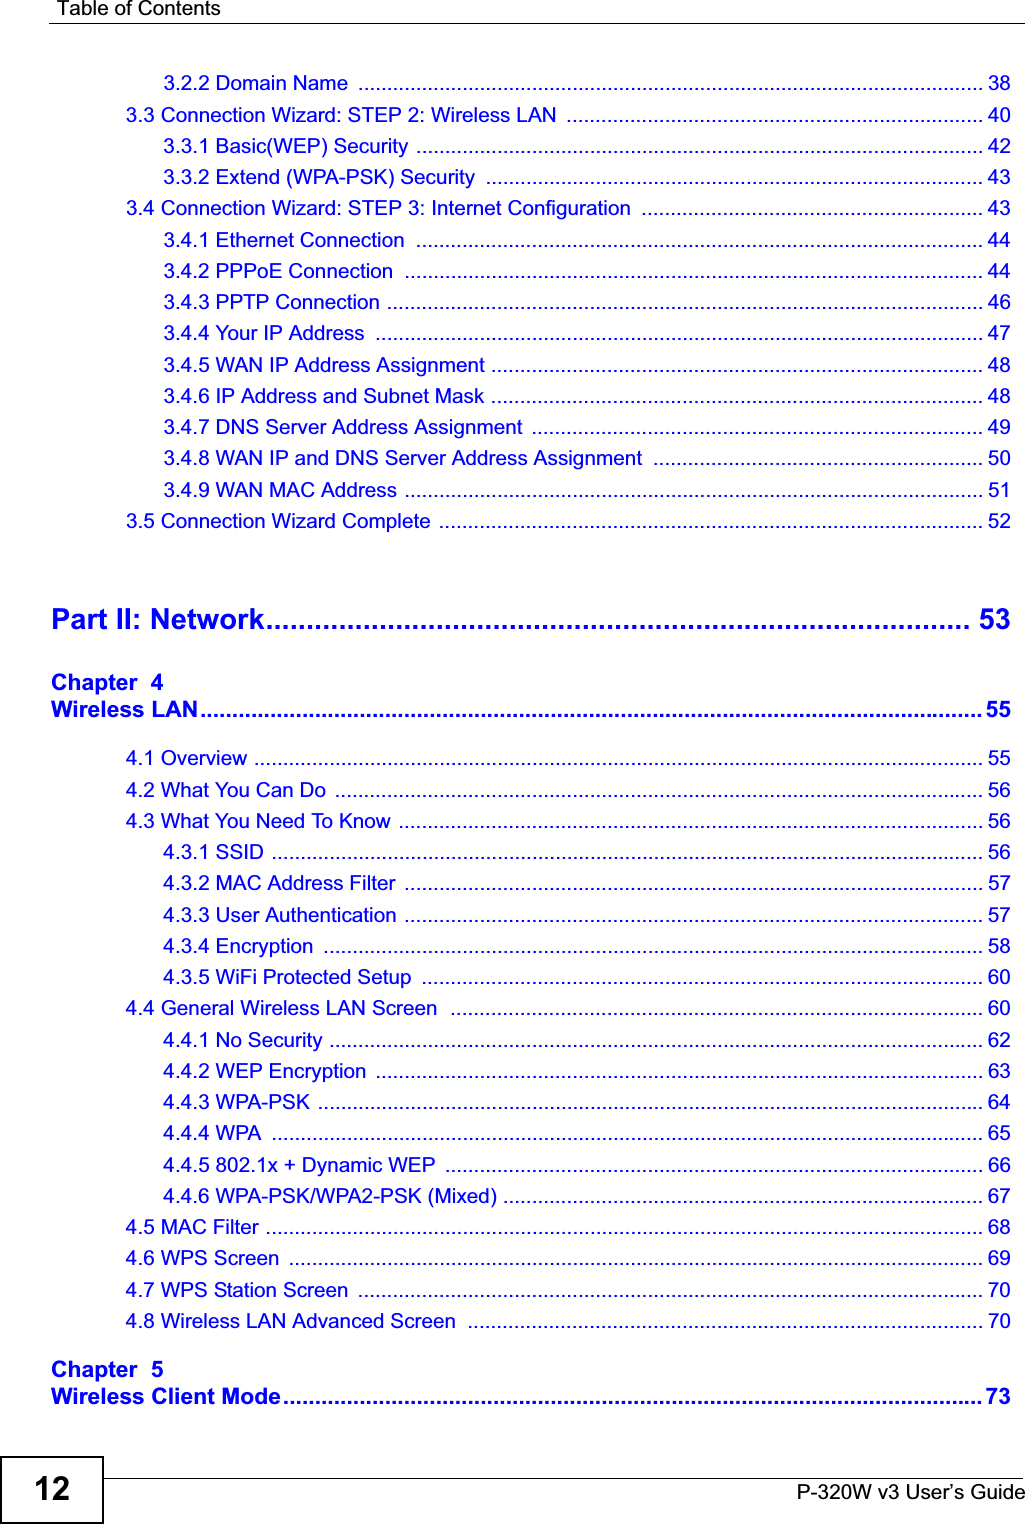 Table of ContentsP-320W v3 User’s Guide123.2.2 Domain Name  ............................................................................................................ 383.3 Connection Wizard: STEP 2: Wireless LAN  ........................................................................ 403.3.1 Basic(WEP) Security .................................................................................................. 423.3.2 Extend (WPA-PSK) Security  ...................................................................................... 433.4 Connection Wizard: STEP 3: Internet Configuration  ........................................................... 433.4.1 Ethernet Connection  .................................................................................................. 443.4.2 PPPoE Connection  .................................................................................................... 443.4.3 PPTP Connection ....................................................................................................... 463.4.4 Your IP Address  ......................................................................................................... 473.4.5 WAN IP Address Assignment ..................................................................................... 483.4.6 IP Address and Subnet Mask ..................................................................................... 483.4.7 DNS Server Address Assignment  .............................................................................. 493.4.8 WAN IP and DNS Server Address Assignment  ......................................................... 503.4.9 WAN MAC Address .................................................................................................... 513.5 Connection Wizard Complete .............................................................................................. 52Part II: Network....................................................................................... 53Chapter  4Wireless LAN........................................................................................................................... 554.1 Overview .............................................................................................................................. 554.2 What You Can Do  ................................................................................................................ 564.3 What You Need To Know ..................................................................................................... 564.3.1 SSID ........................................................................................................................... 564.3.2 MAC Address Filter  .................................................................................................... 574.3.3 User Authentication .................................................................................................... 574.3.4 Encryption  .................................................................................................................. 584.3.5 WiFi Protected Setup  ................................................................................................. 604.4 General Wireless LAN Screen  ............................................................................................ 604.4.1 No Security ................................................................................................................. 624.4.2 WEP Encryption  ......................................................................................................... 634.4.3 WPA-PSK ................................................................................................................... 644.4.4 WPA  ........................................................................................................................... 654.4.5 802.1x + Dynamic WEP  ............................................................................................. 664.4.6 WPA-PSK/WPA2-PSK (Mixed) ................................................................................... 674.5 MAC Filter ............................................................................................................................ 684.6 WPS Screen  ........................................................................................................................ 694.7 WPS Station Screen  ............................................................................................................ 704.8 Wireless LAN Advanced Screen  ......................................................................................... 70Chapter  5Wireless Client Mode.............................................................................................................. 73